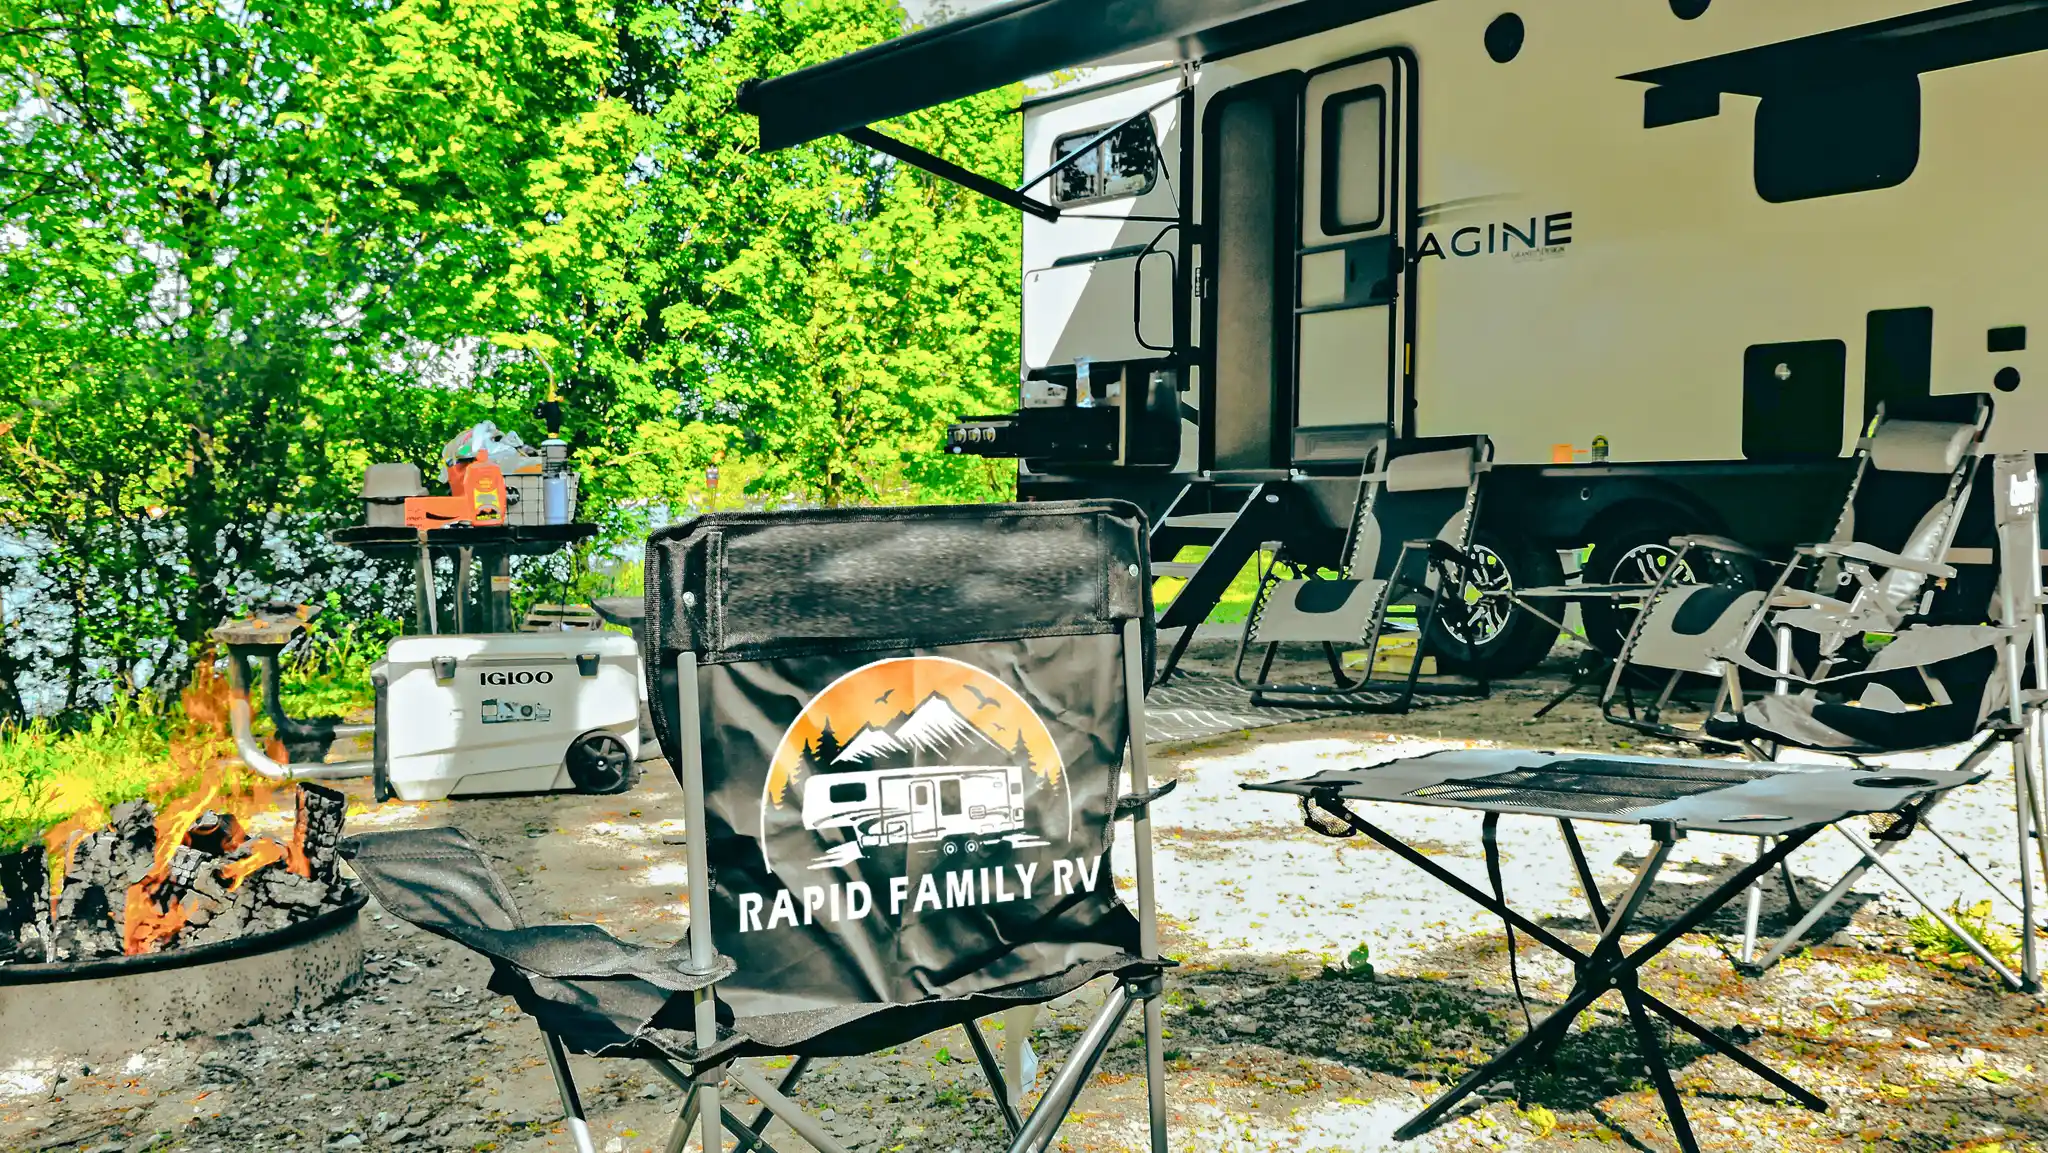 A pre setup campsite done by Rapid Family RV featuring several included amenities